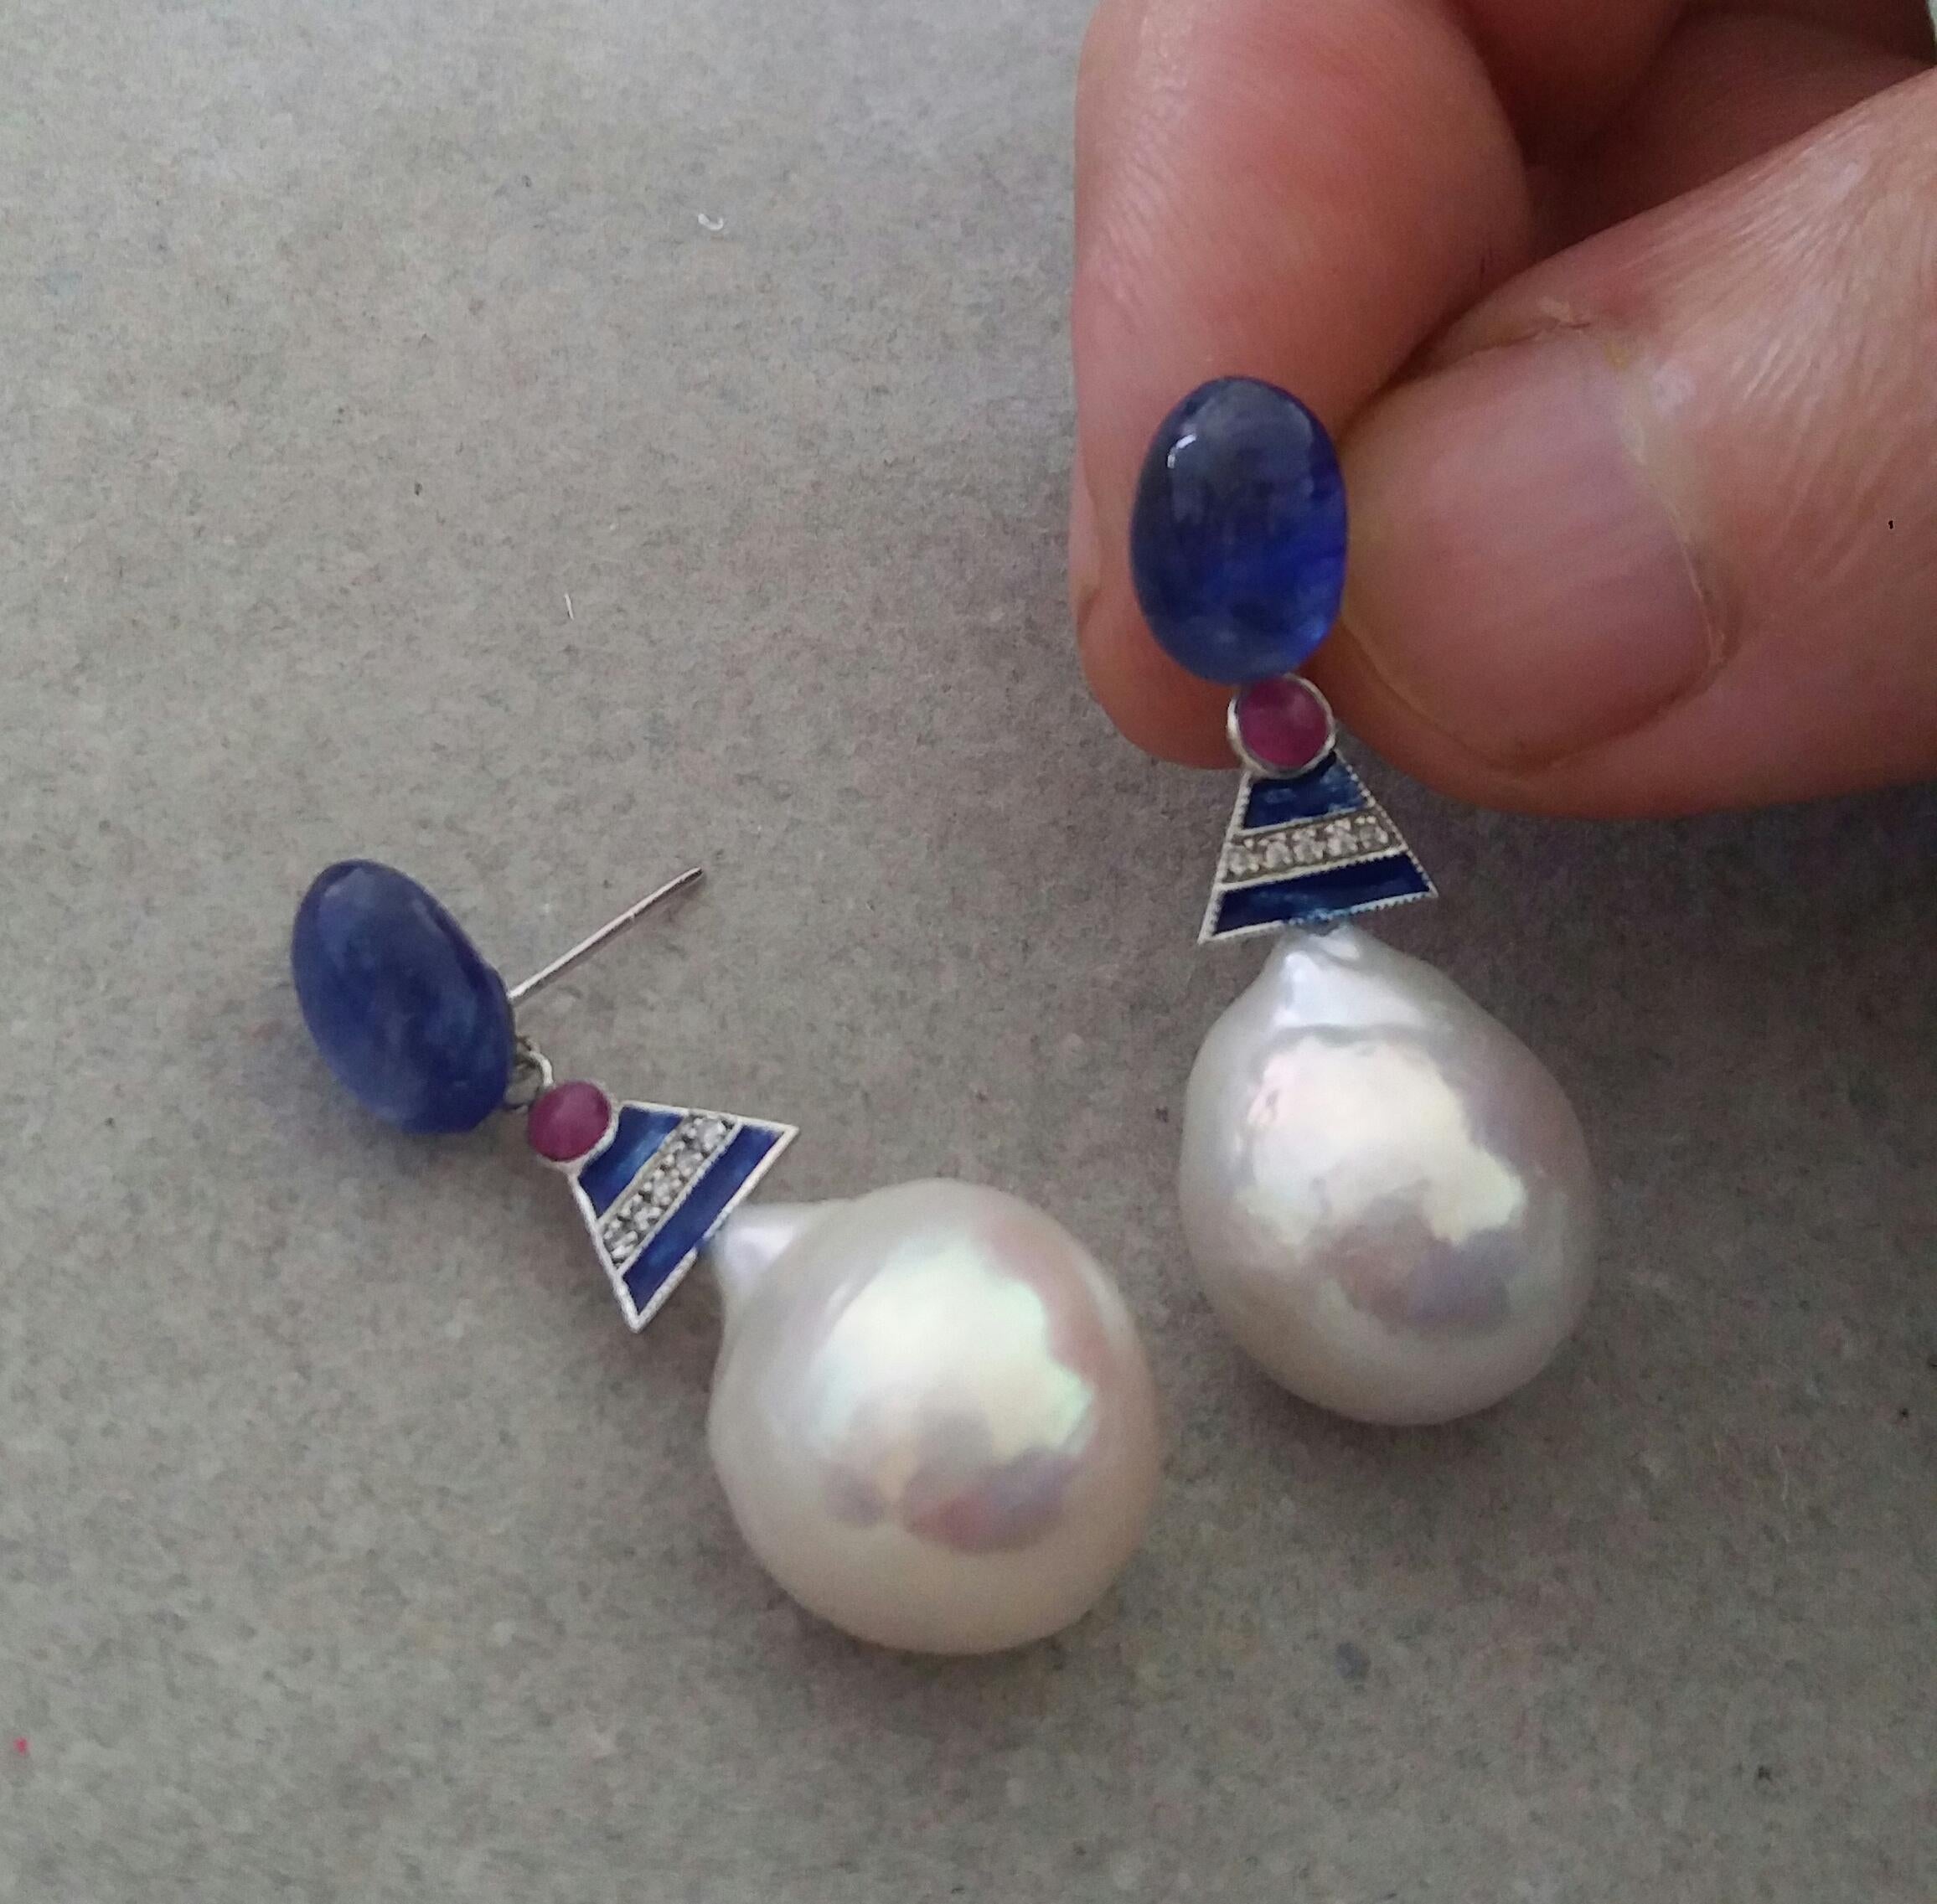 2  Blue Sapphire oval cabs 7,5 x 10 mm. are the upper parts, then the central parts are in white gold,2 small round ruby cabochons, 10 round full cut  diamonds and Blue Enamel, the lower parts are composed of 2 Big White Baroque Pearls with a